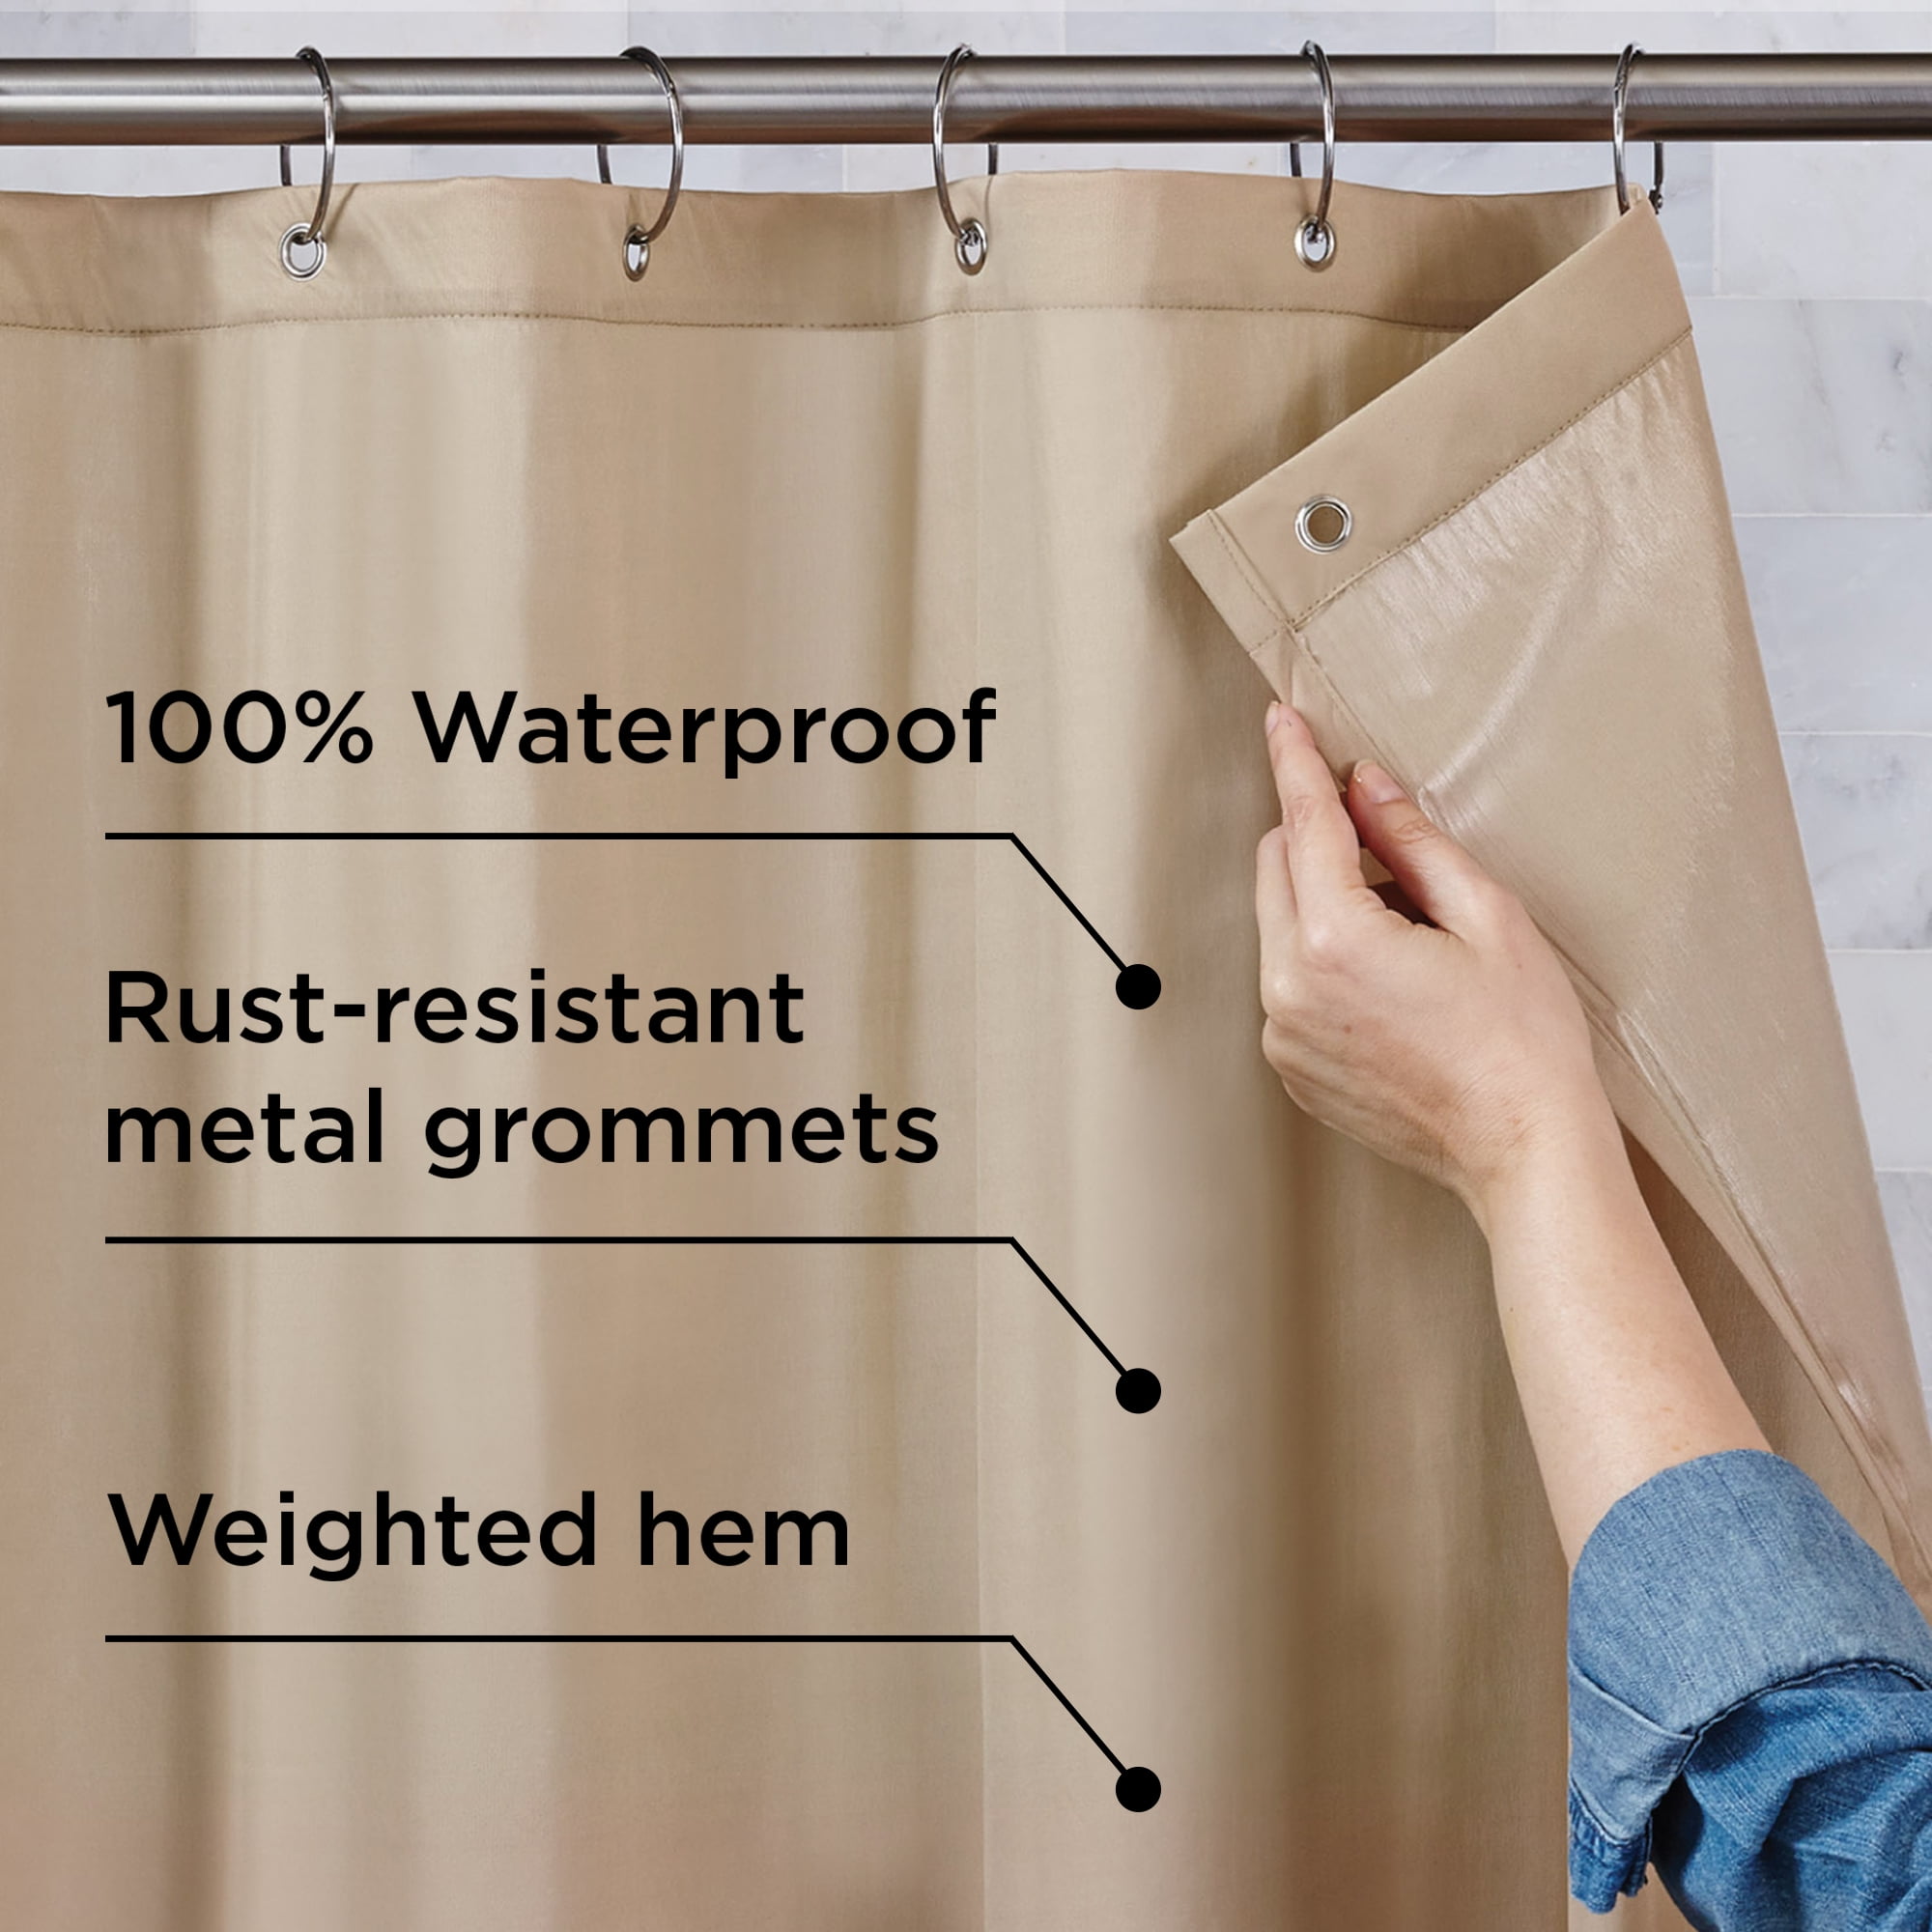 Washable Fabric Shower Curtain Liner, How Often Should You Change Your Shower Curtain Liner